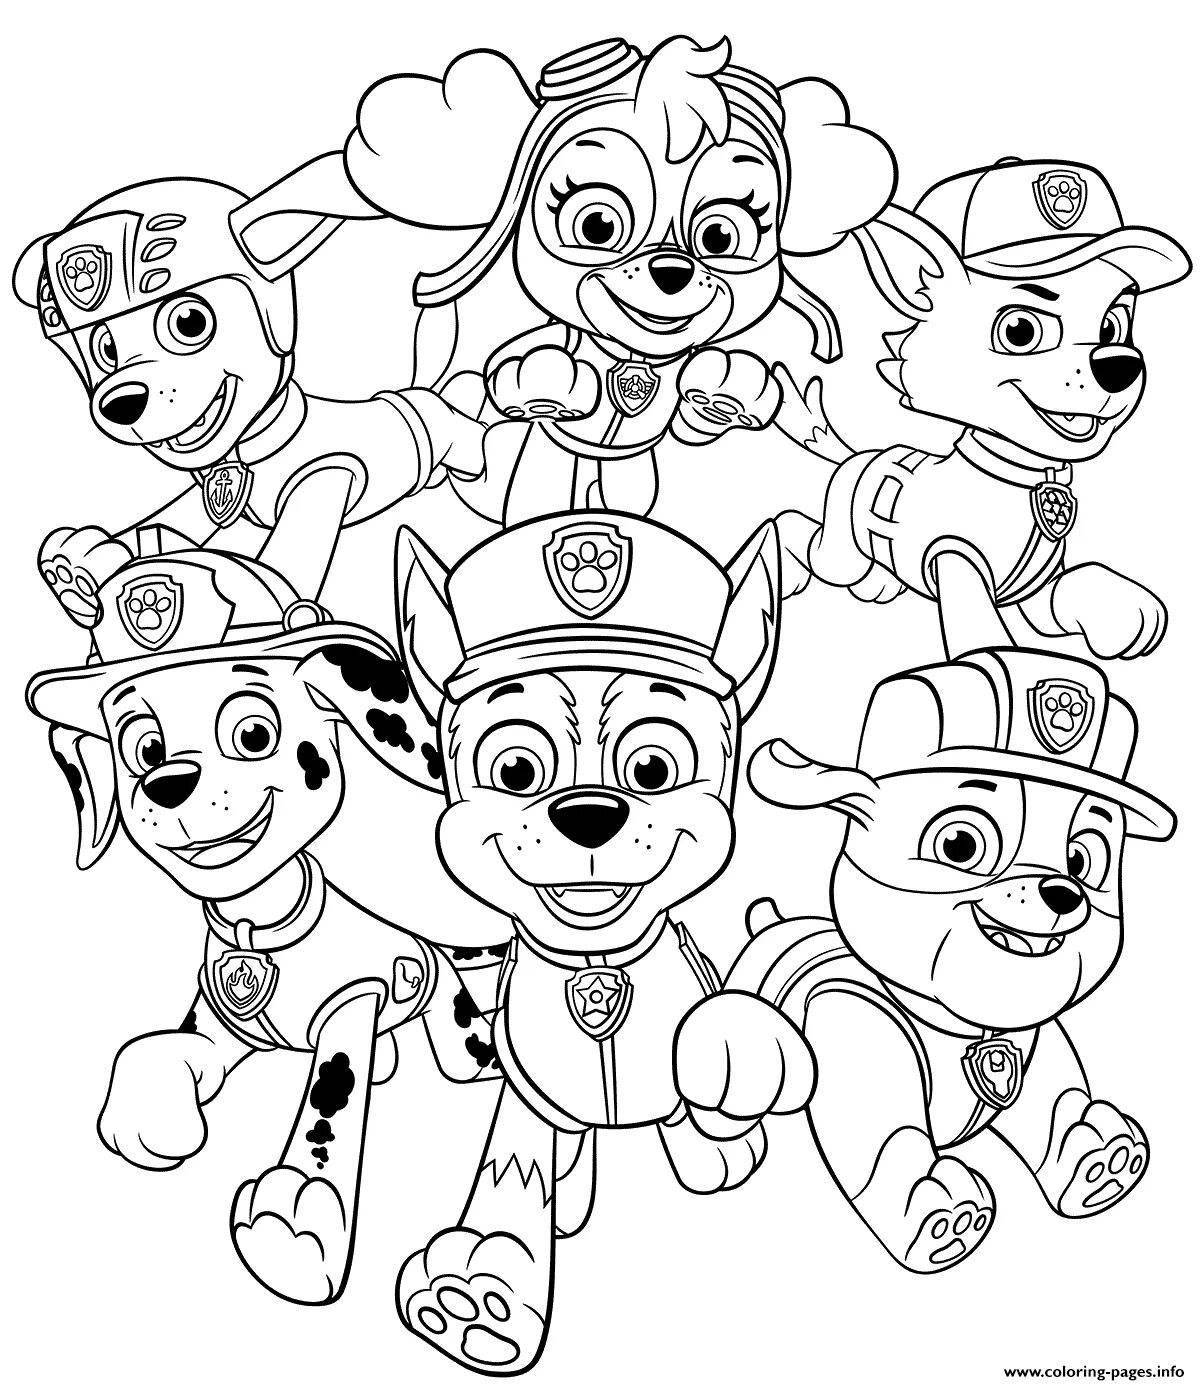 Color-frenzy paw patrol coloring book for kids 5 years old